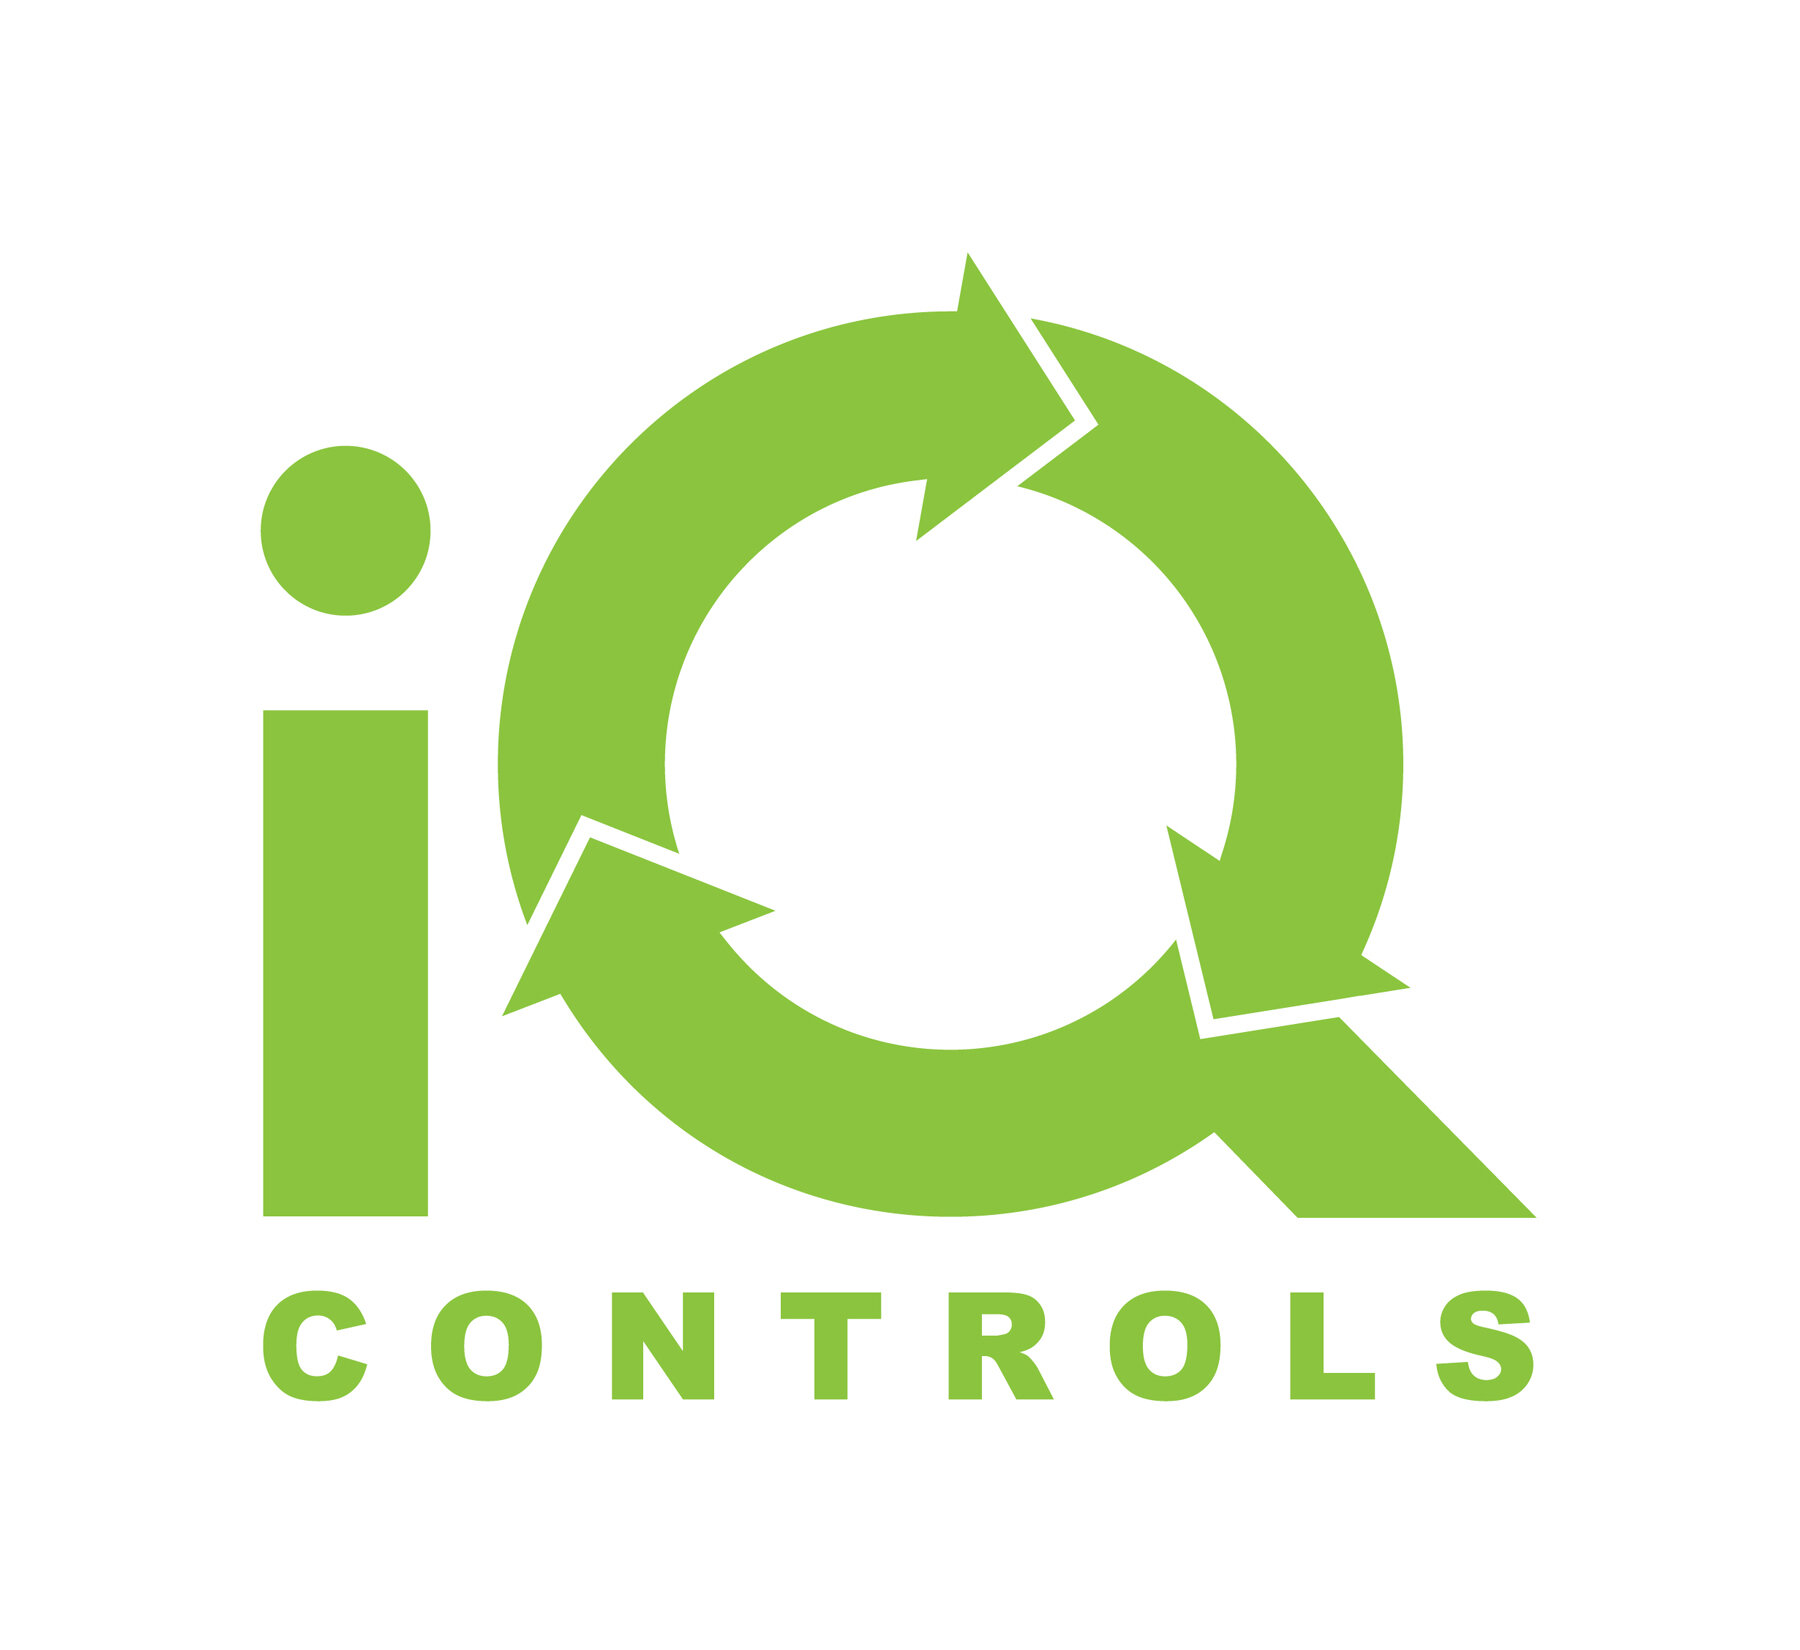  Logo design for iQ Controls, an Air Conditioning and turn-key solutions engineering company located in Walnut Creek, CA 